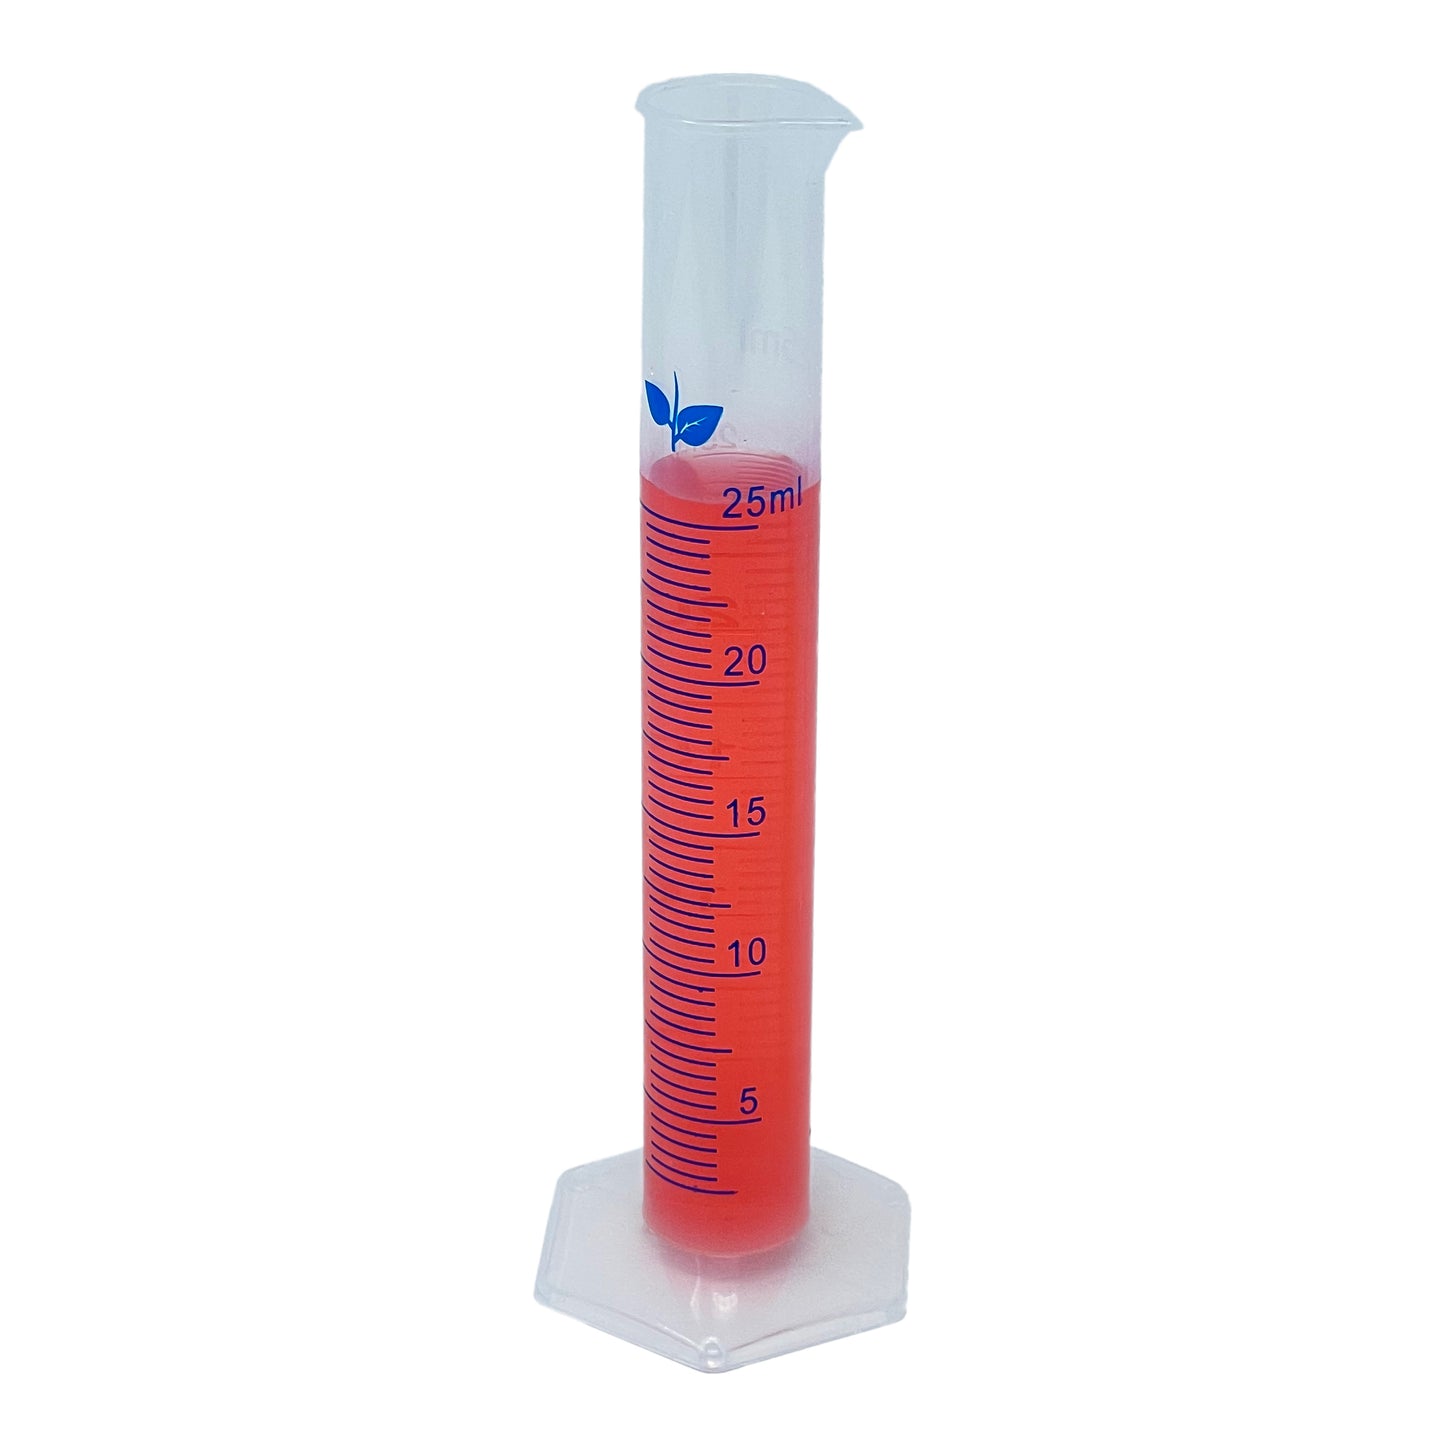 Indo Measuring Kit - 10, 25, and 50 mL Graduated Cylinders with Three 3 mL Plastic Transfer Pipettes - for Measuring Liquids, Solutions, Nutrients, Experiments